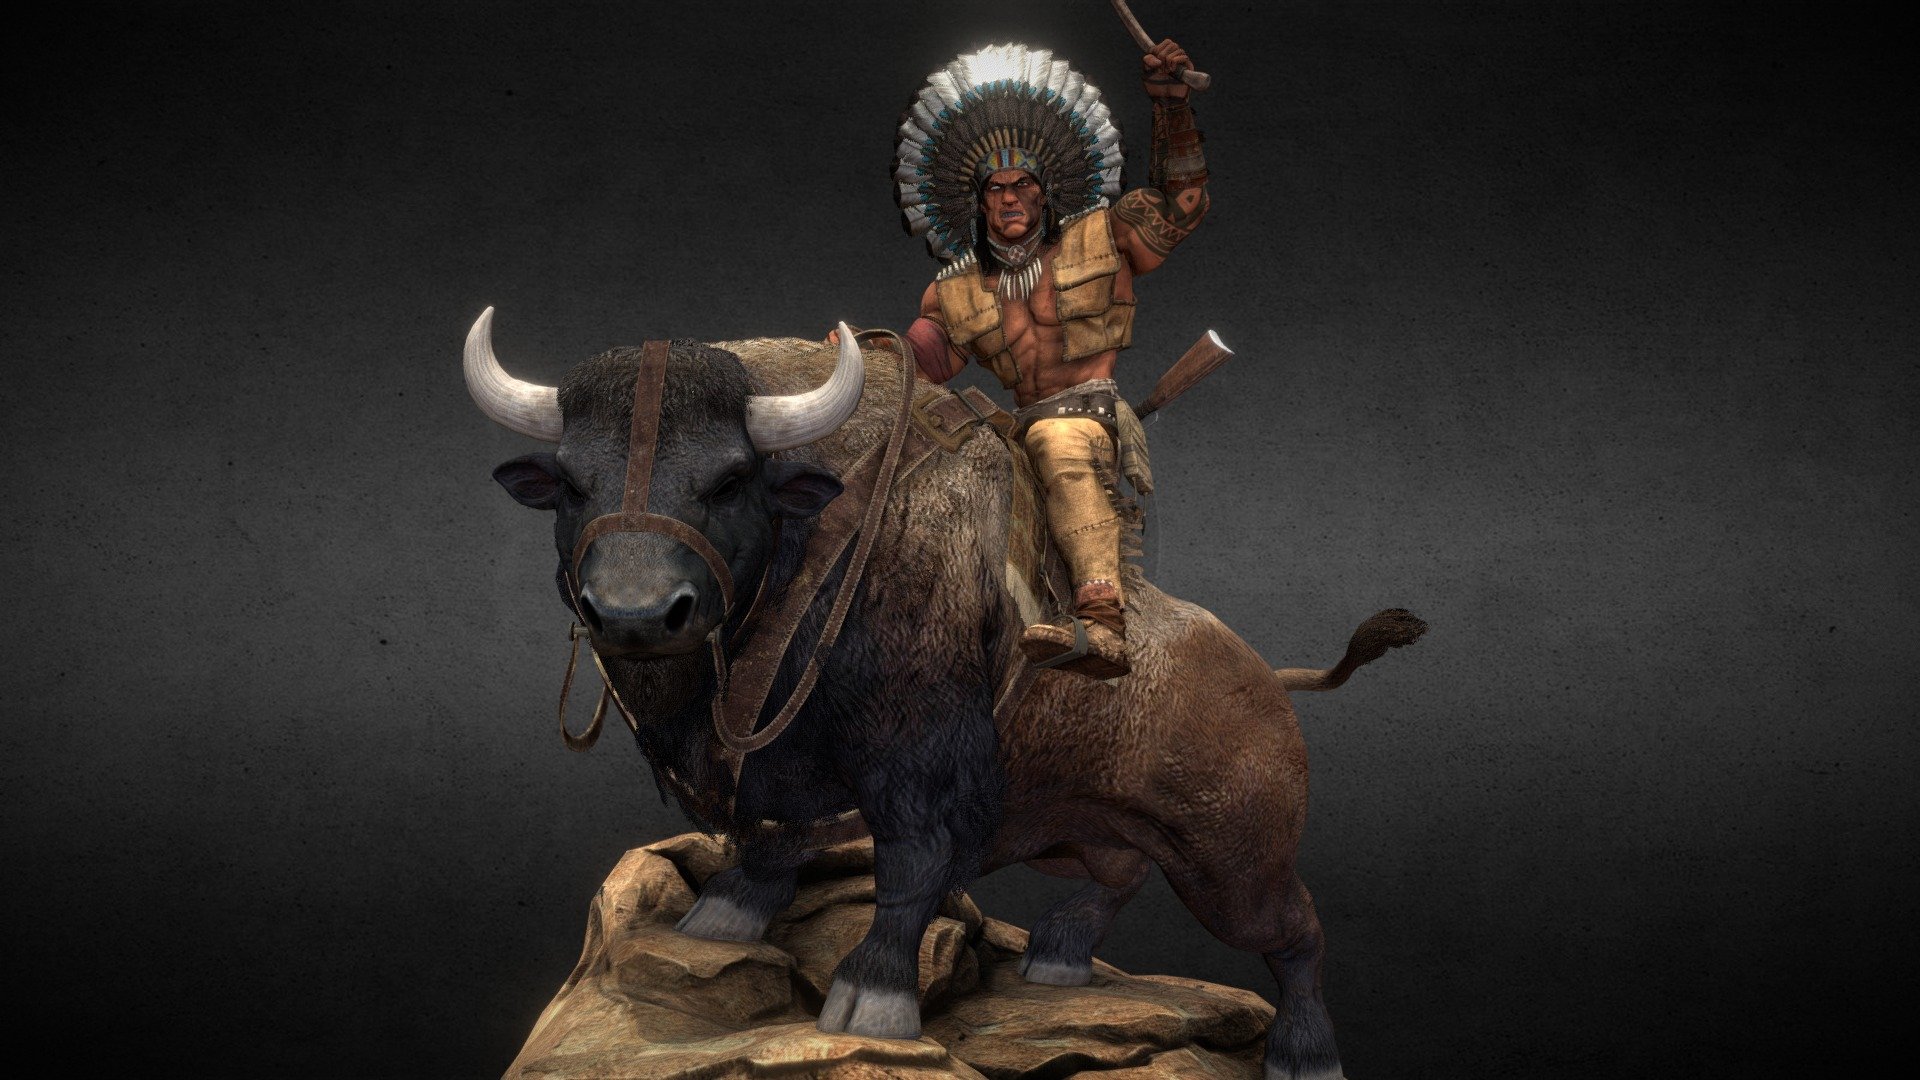 Characters made from scratch with Zbrush, Maya, Photoshop, MDesigner, xnormal,SPainter .. the start point was a fantastic concept of Veselin Ankov www.artstation.com/pigbot.. I add my touch with the buffalo, an imponent animal. Full project here https://www.artstation.com/artwork/z8vVL

For this character my work did consist of modeling and sculpting, retopo, uvs, bake, textures, rig and animation 3d model